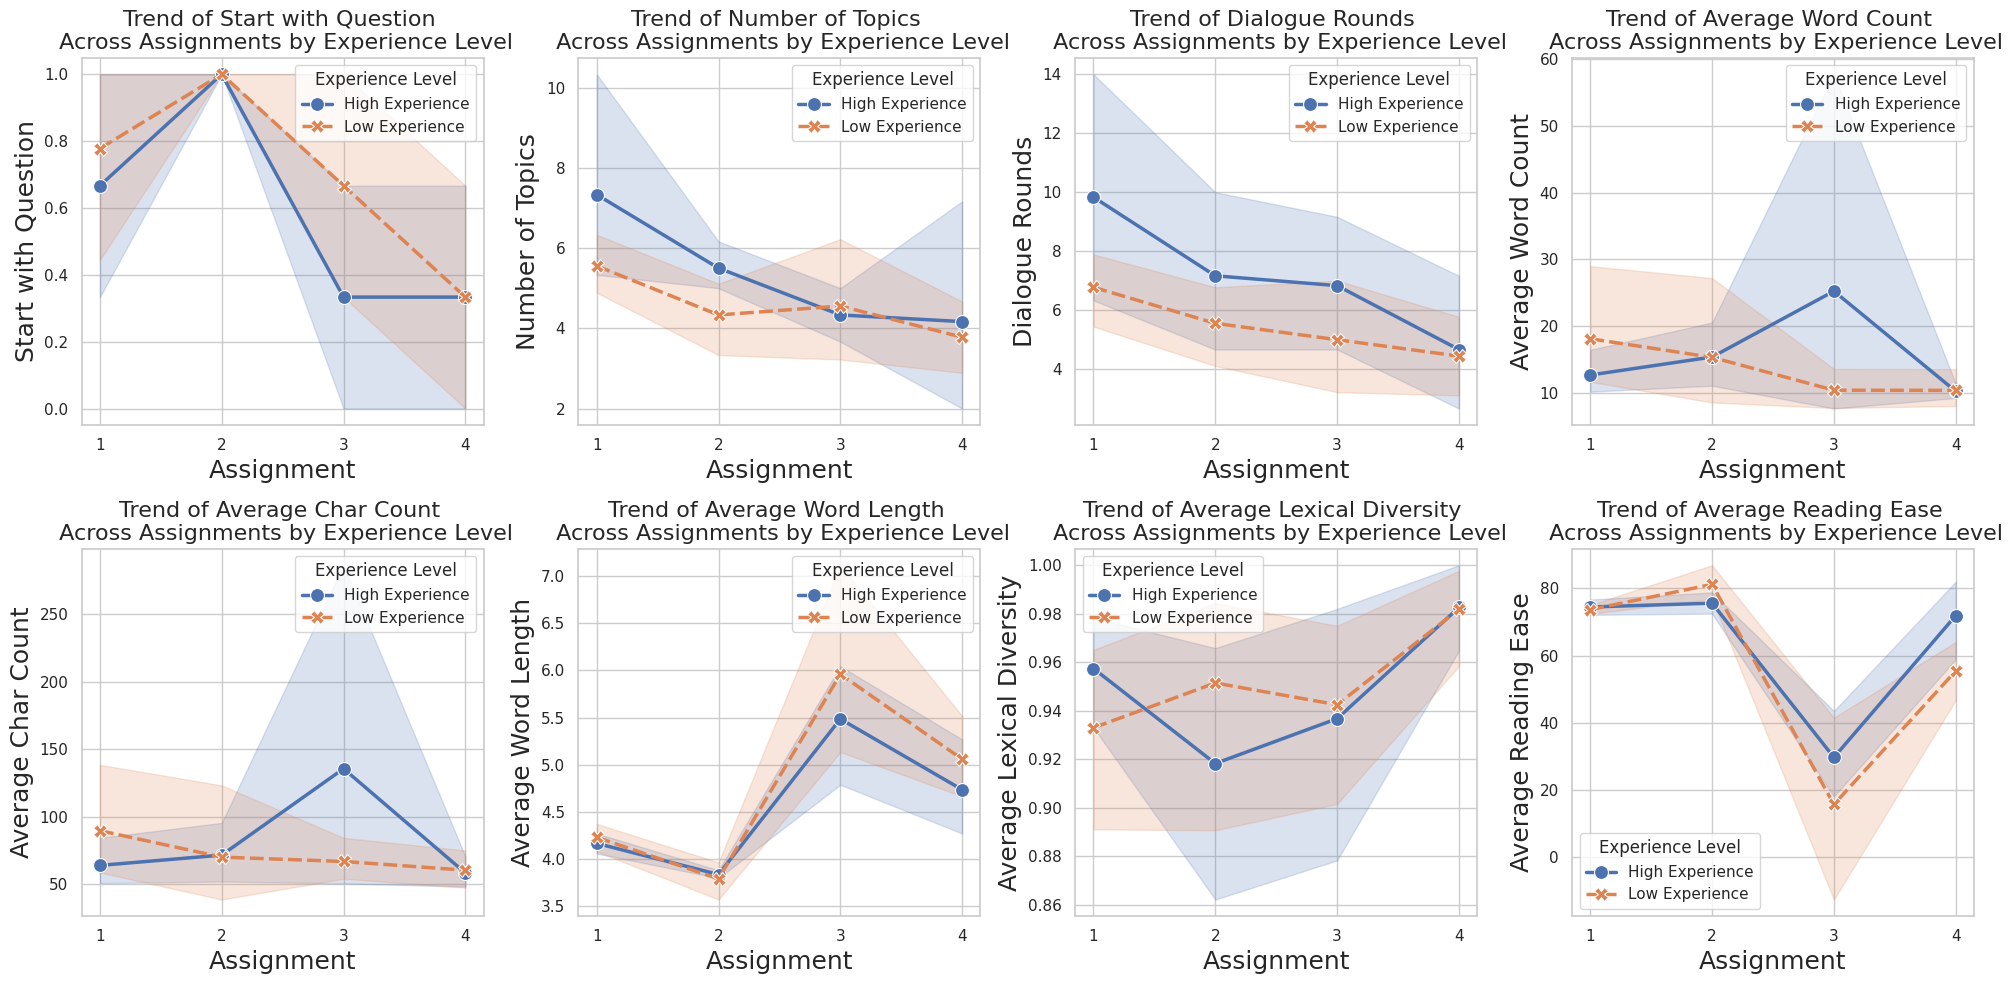 Sequential Assignment: Longitudinal Trends in Dialogue Features